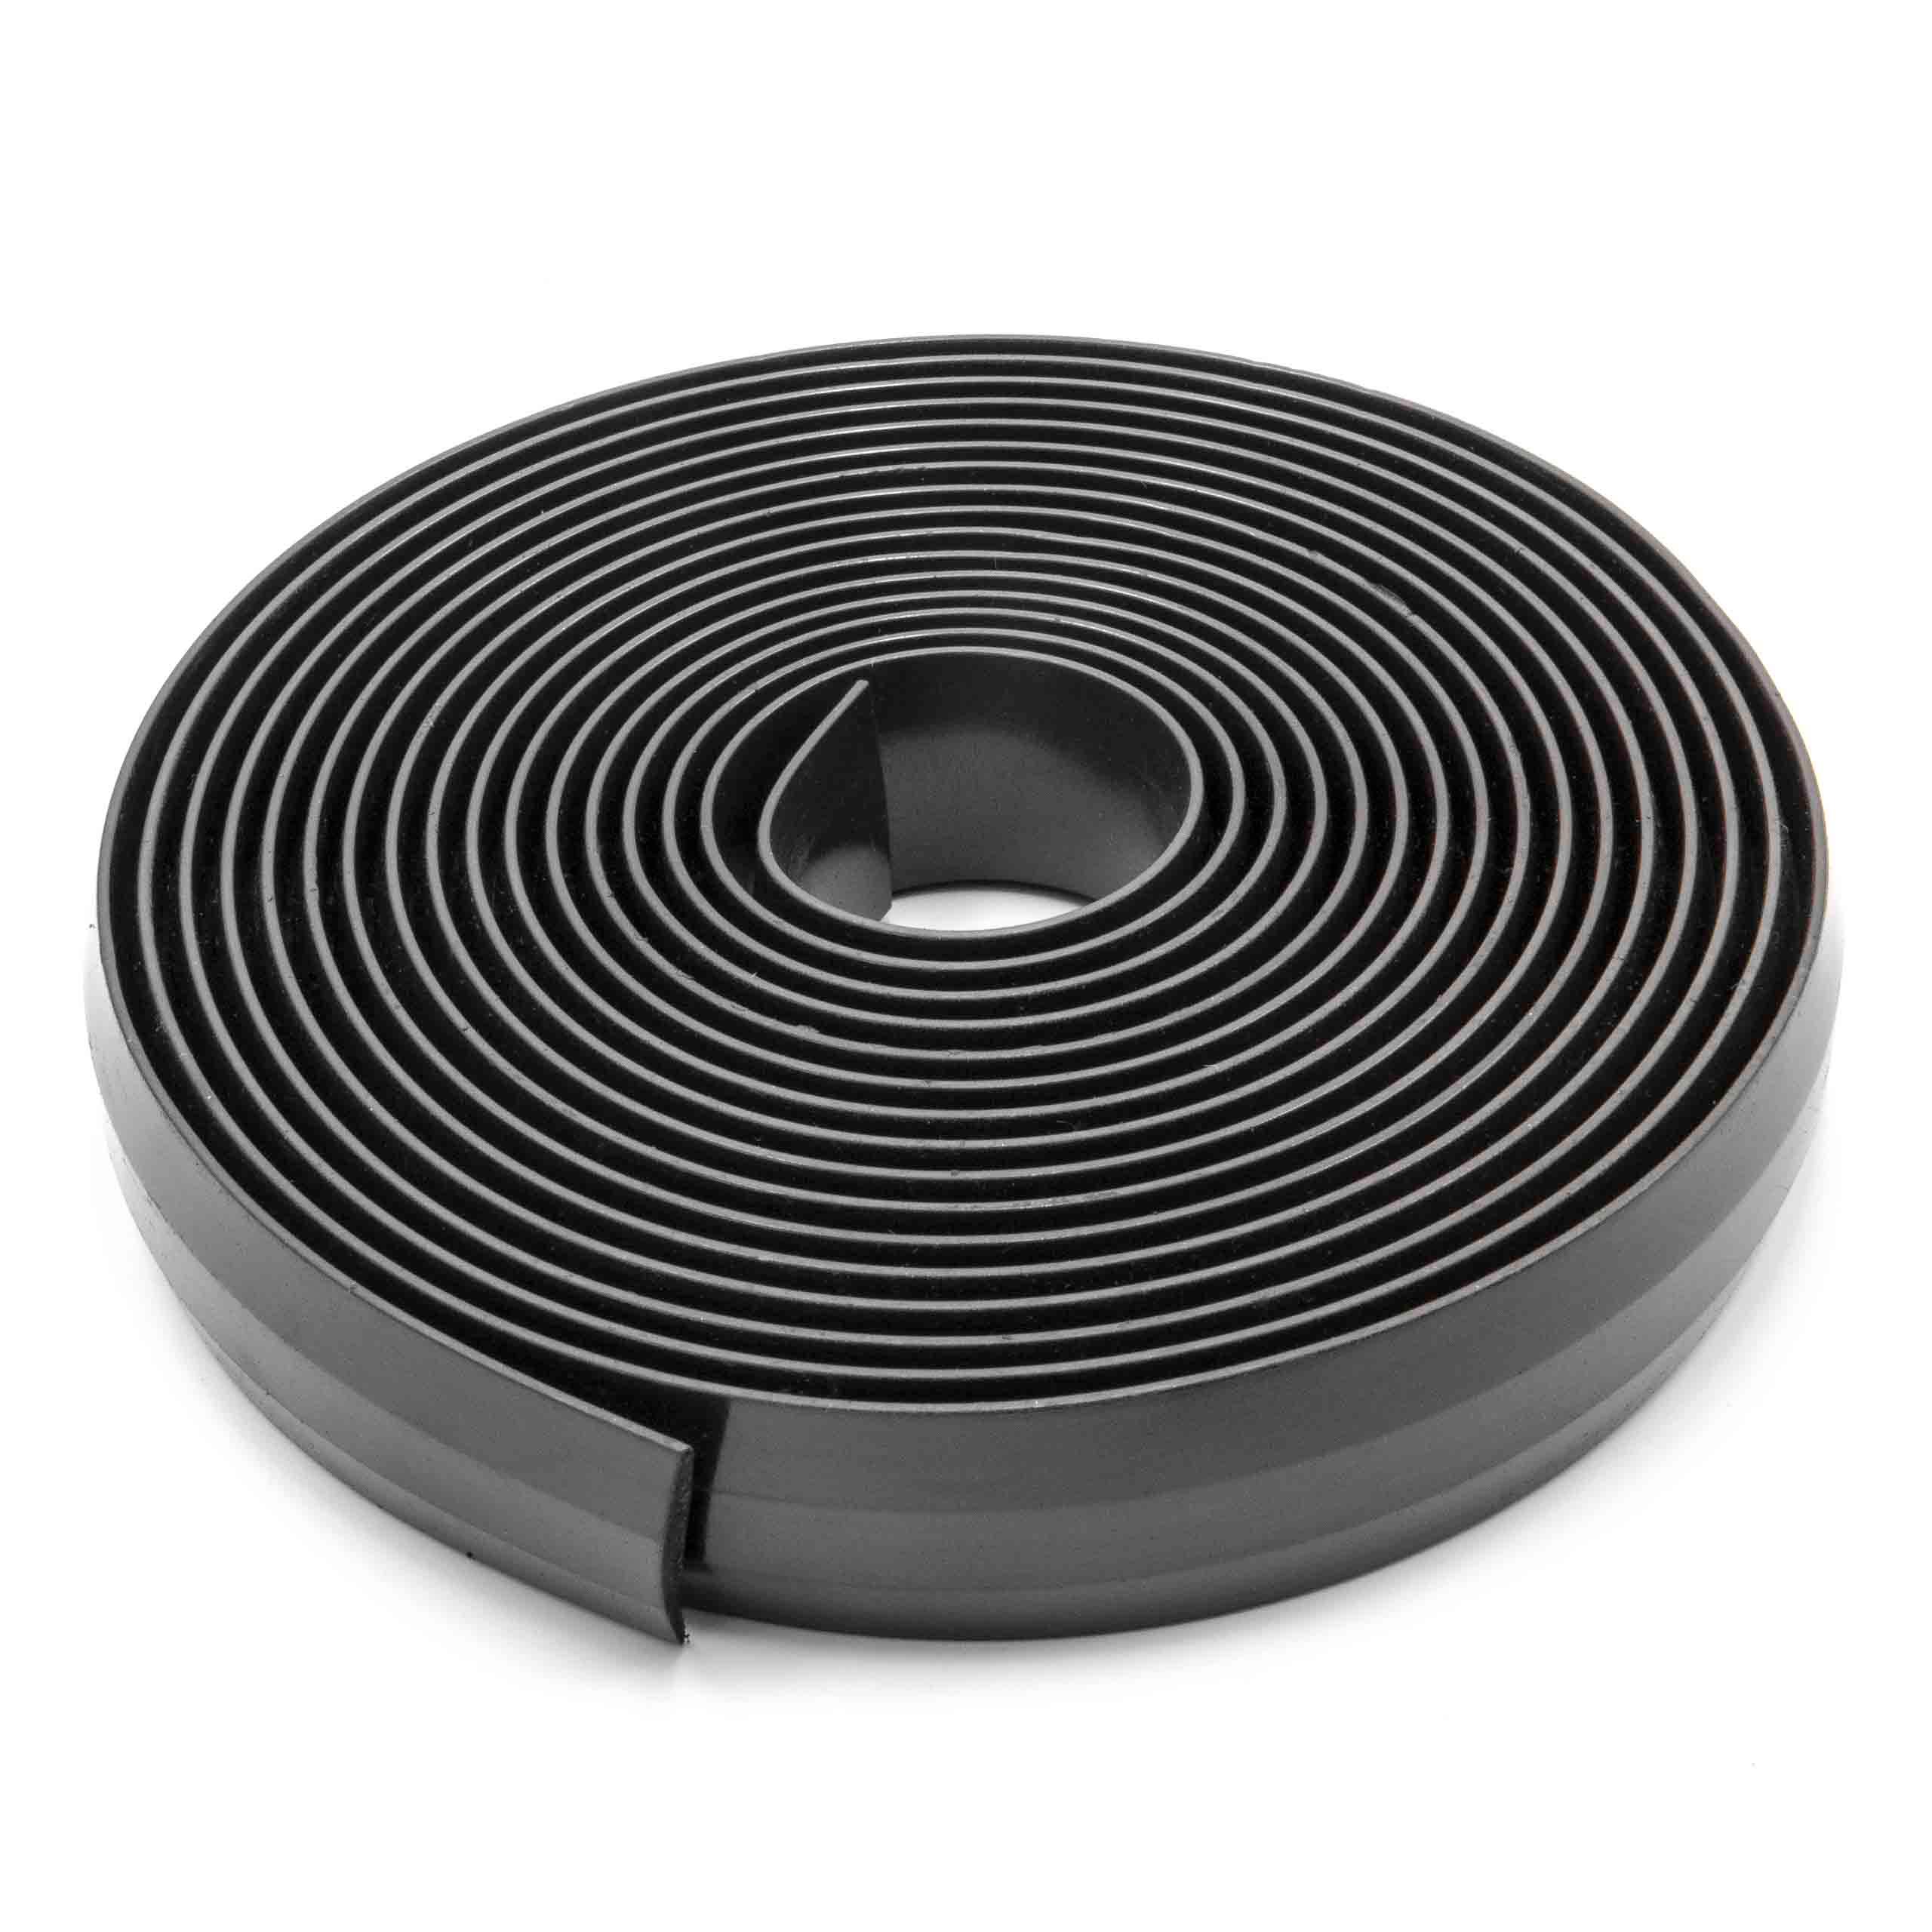 Boundary Strips replaces Rowenta ZR690001 for BlaupunktRobot Vacuum Cleaner - 4.5 m